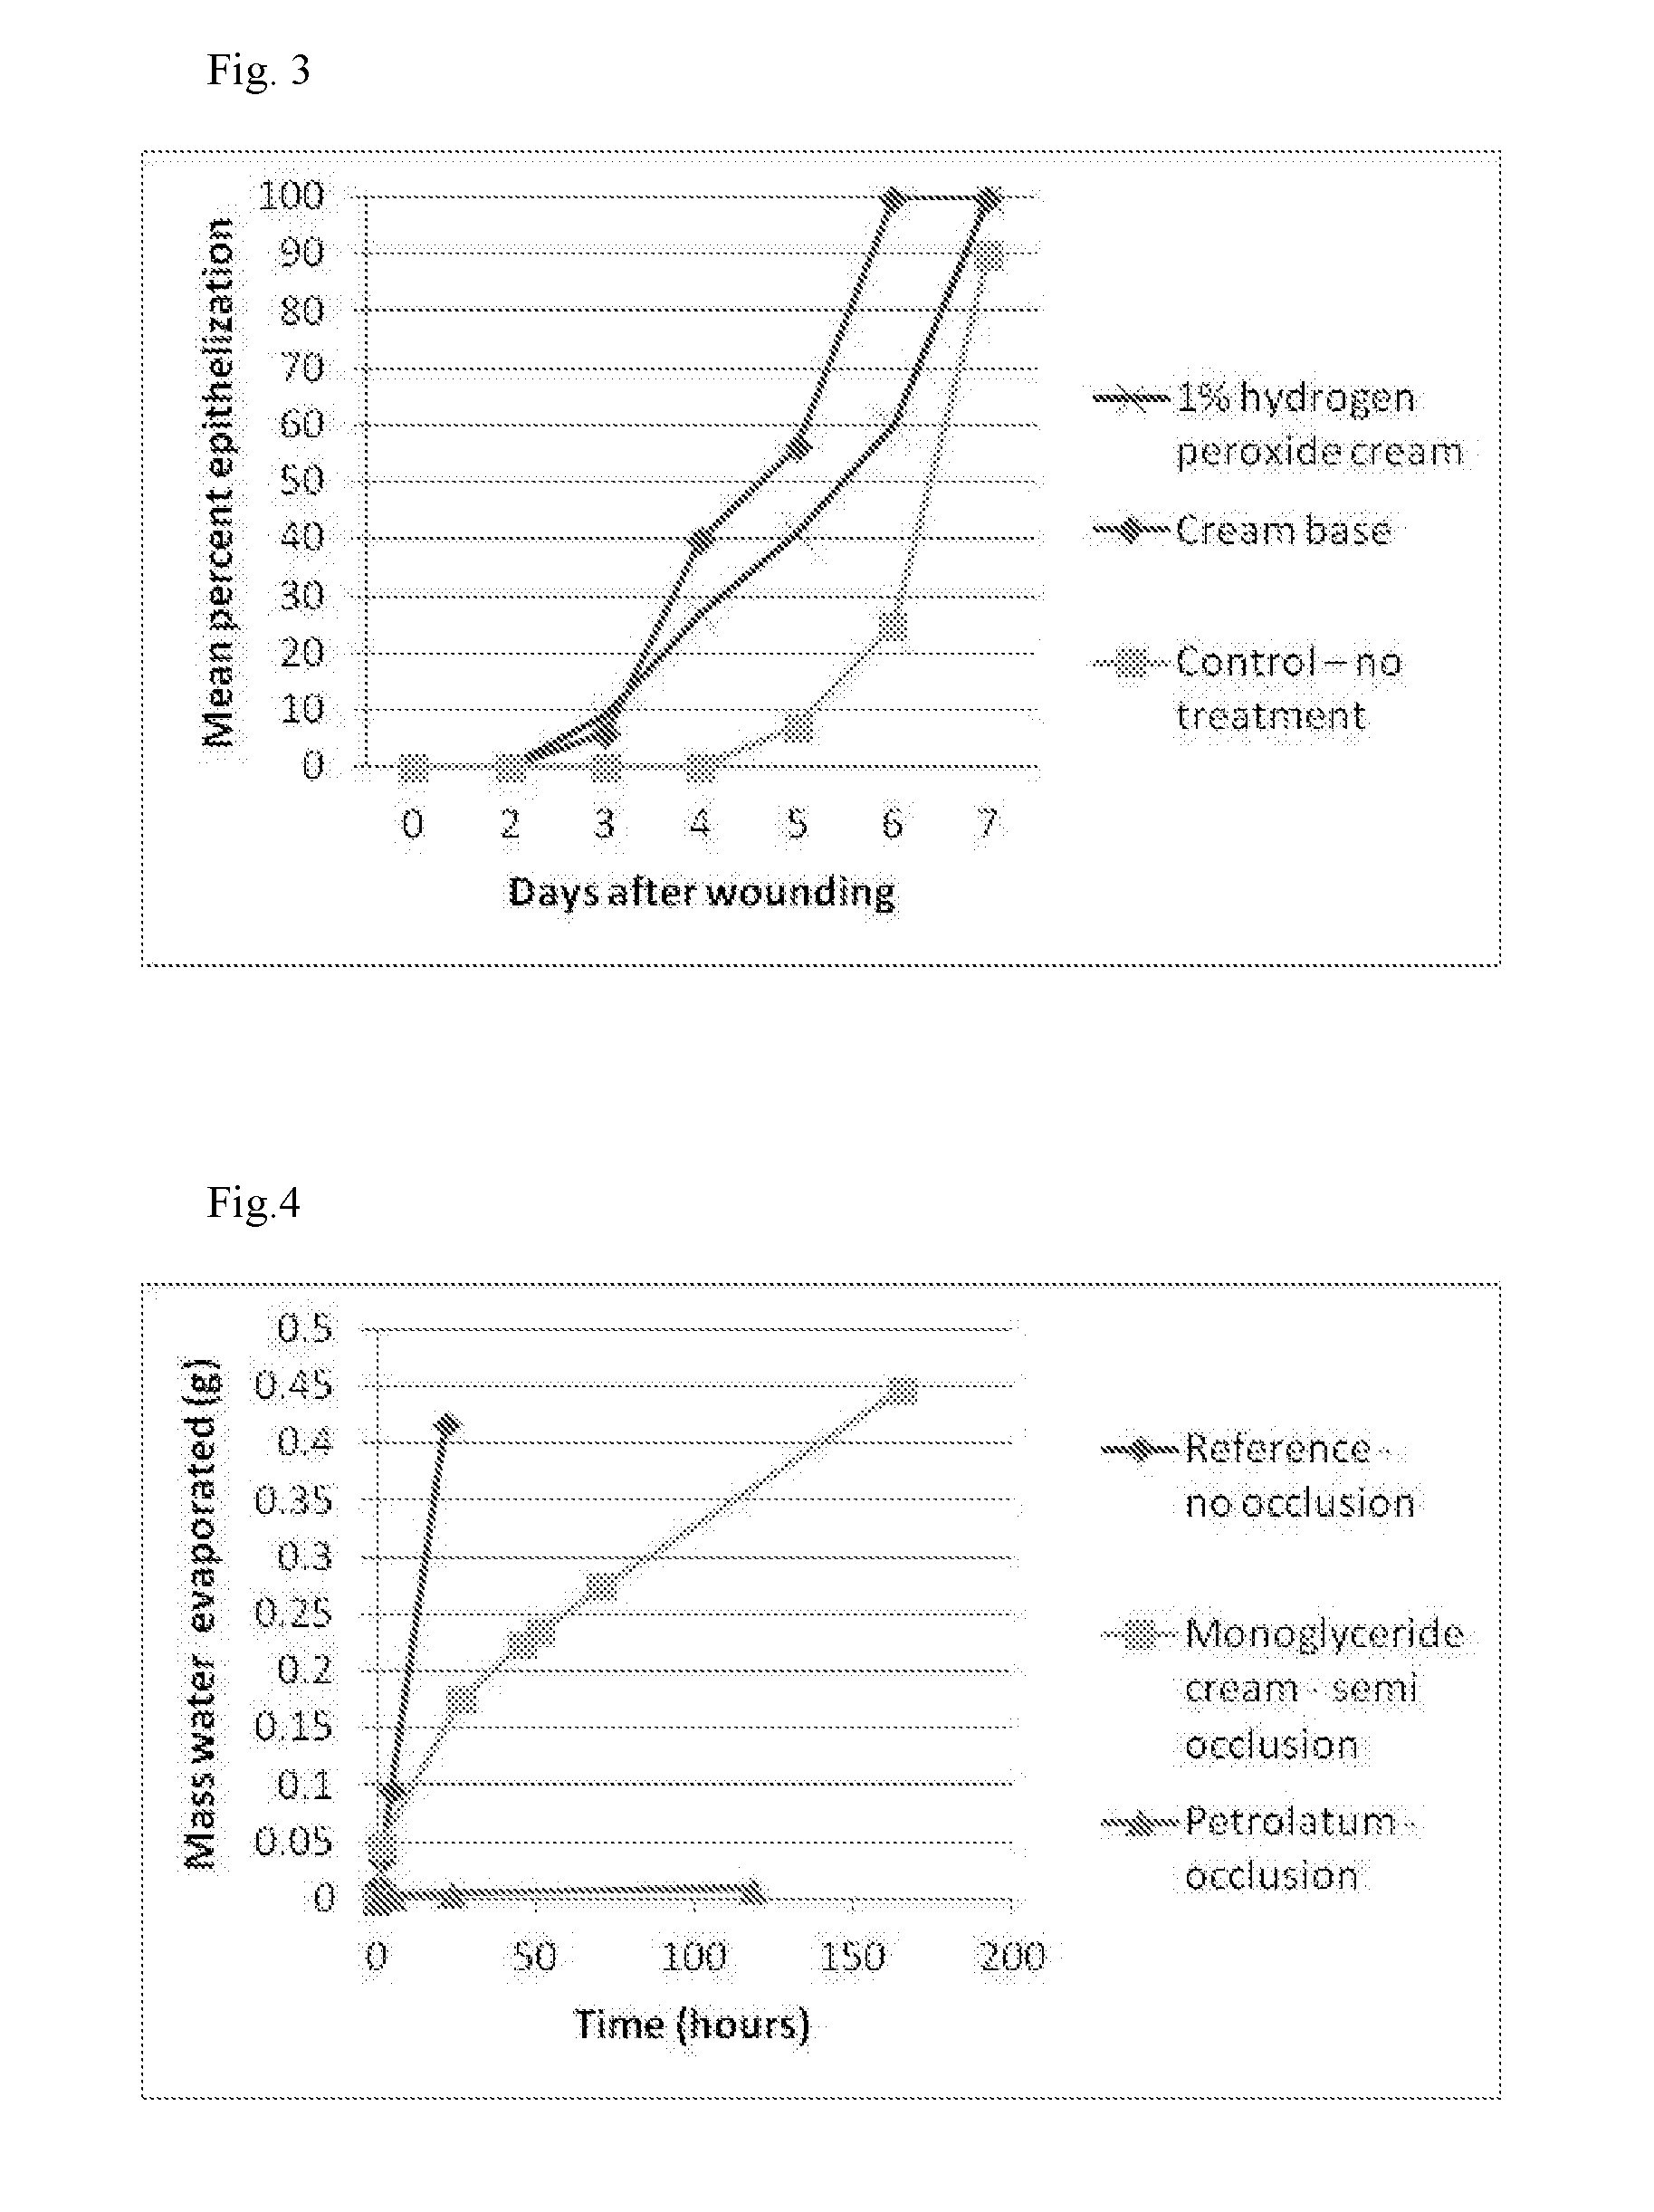 Composition for use in reducing scab formation and promoting healing